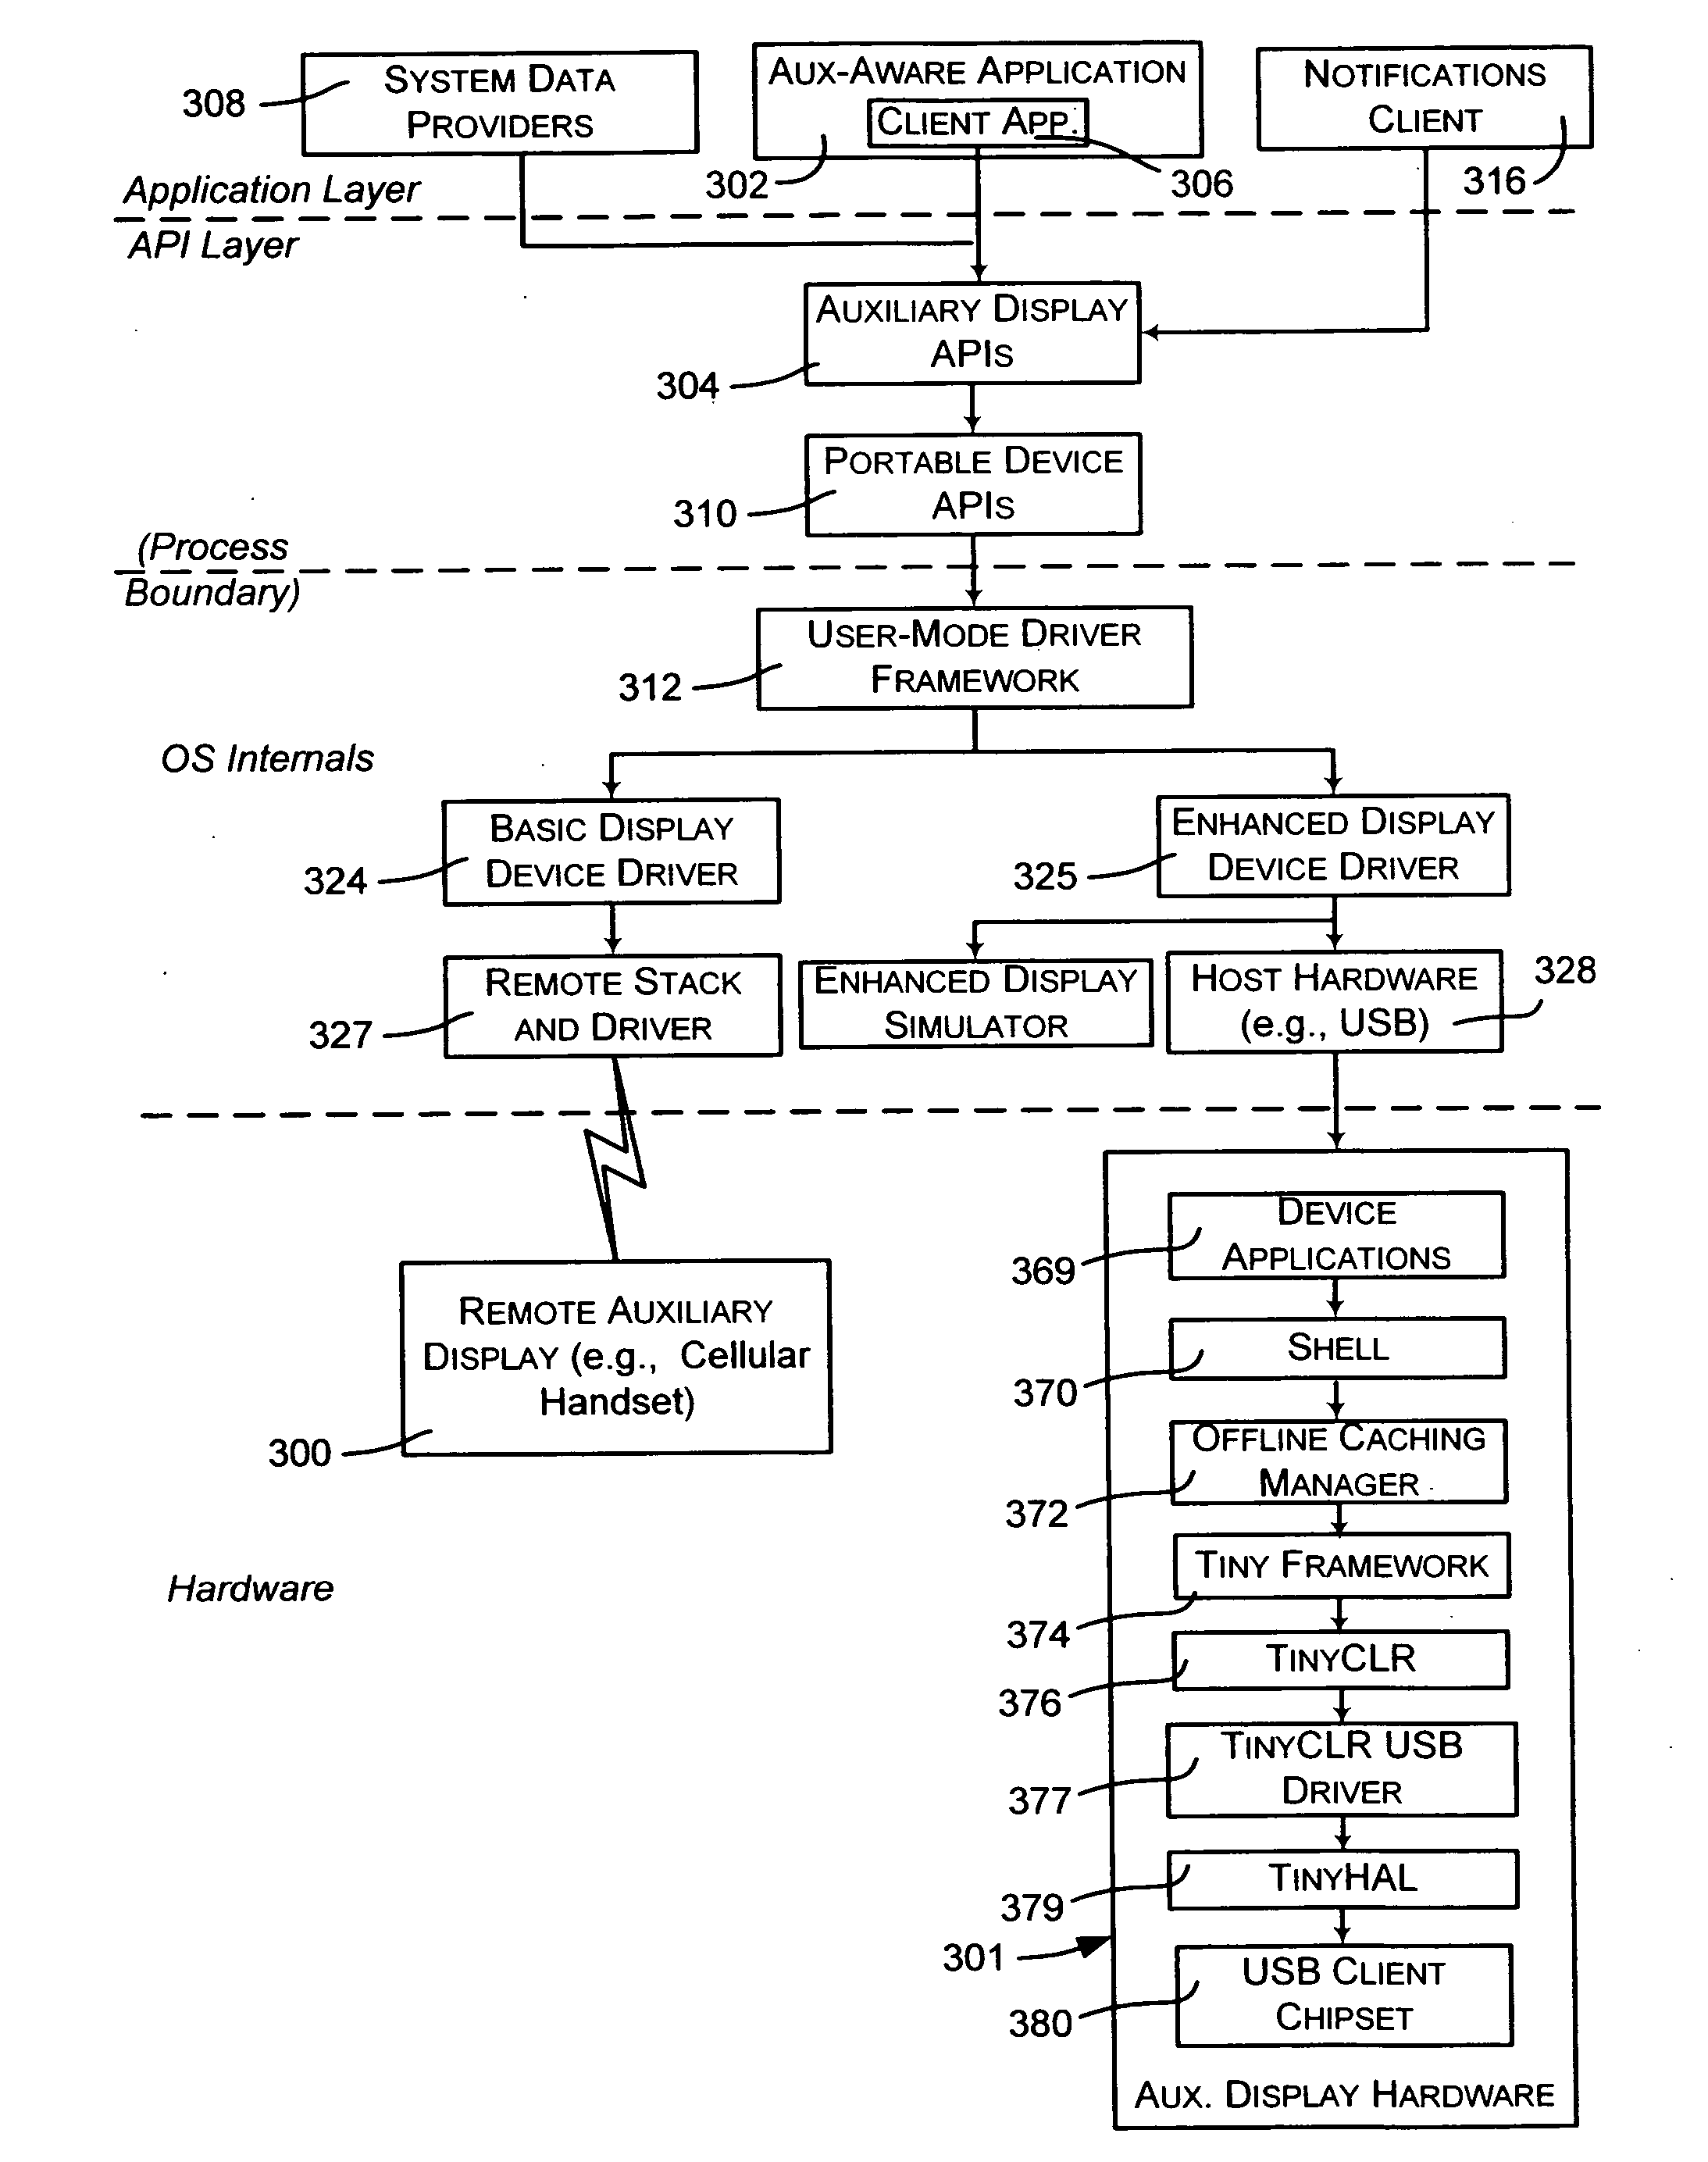 Extensible architecture for auxiliary displays